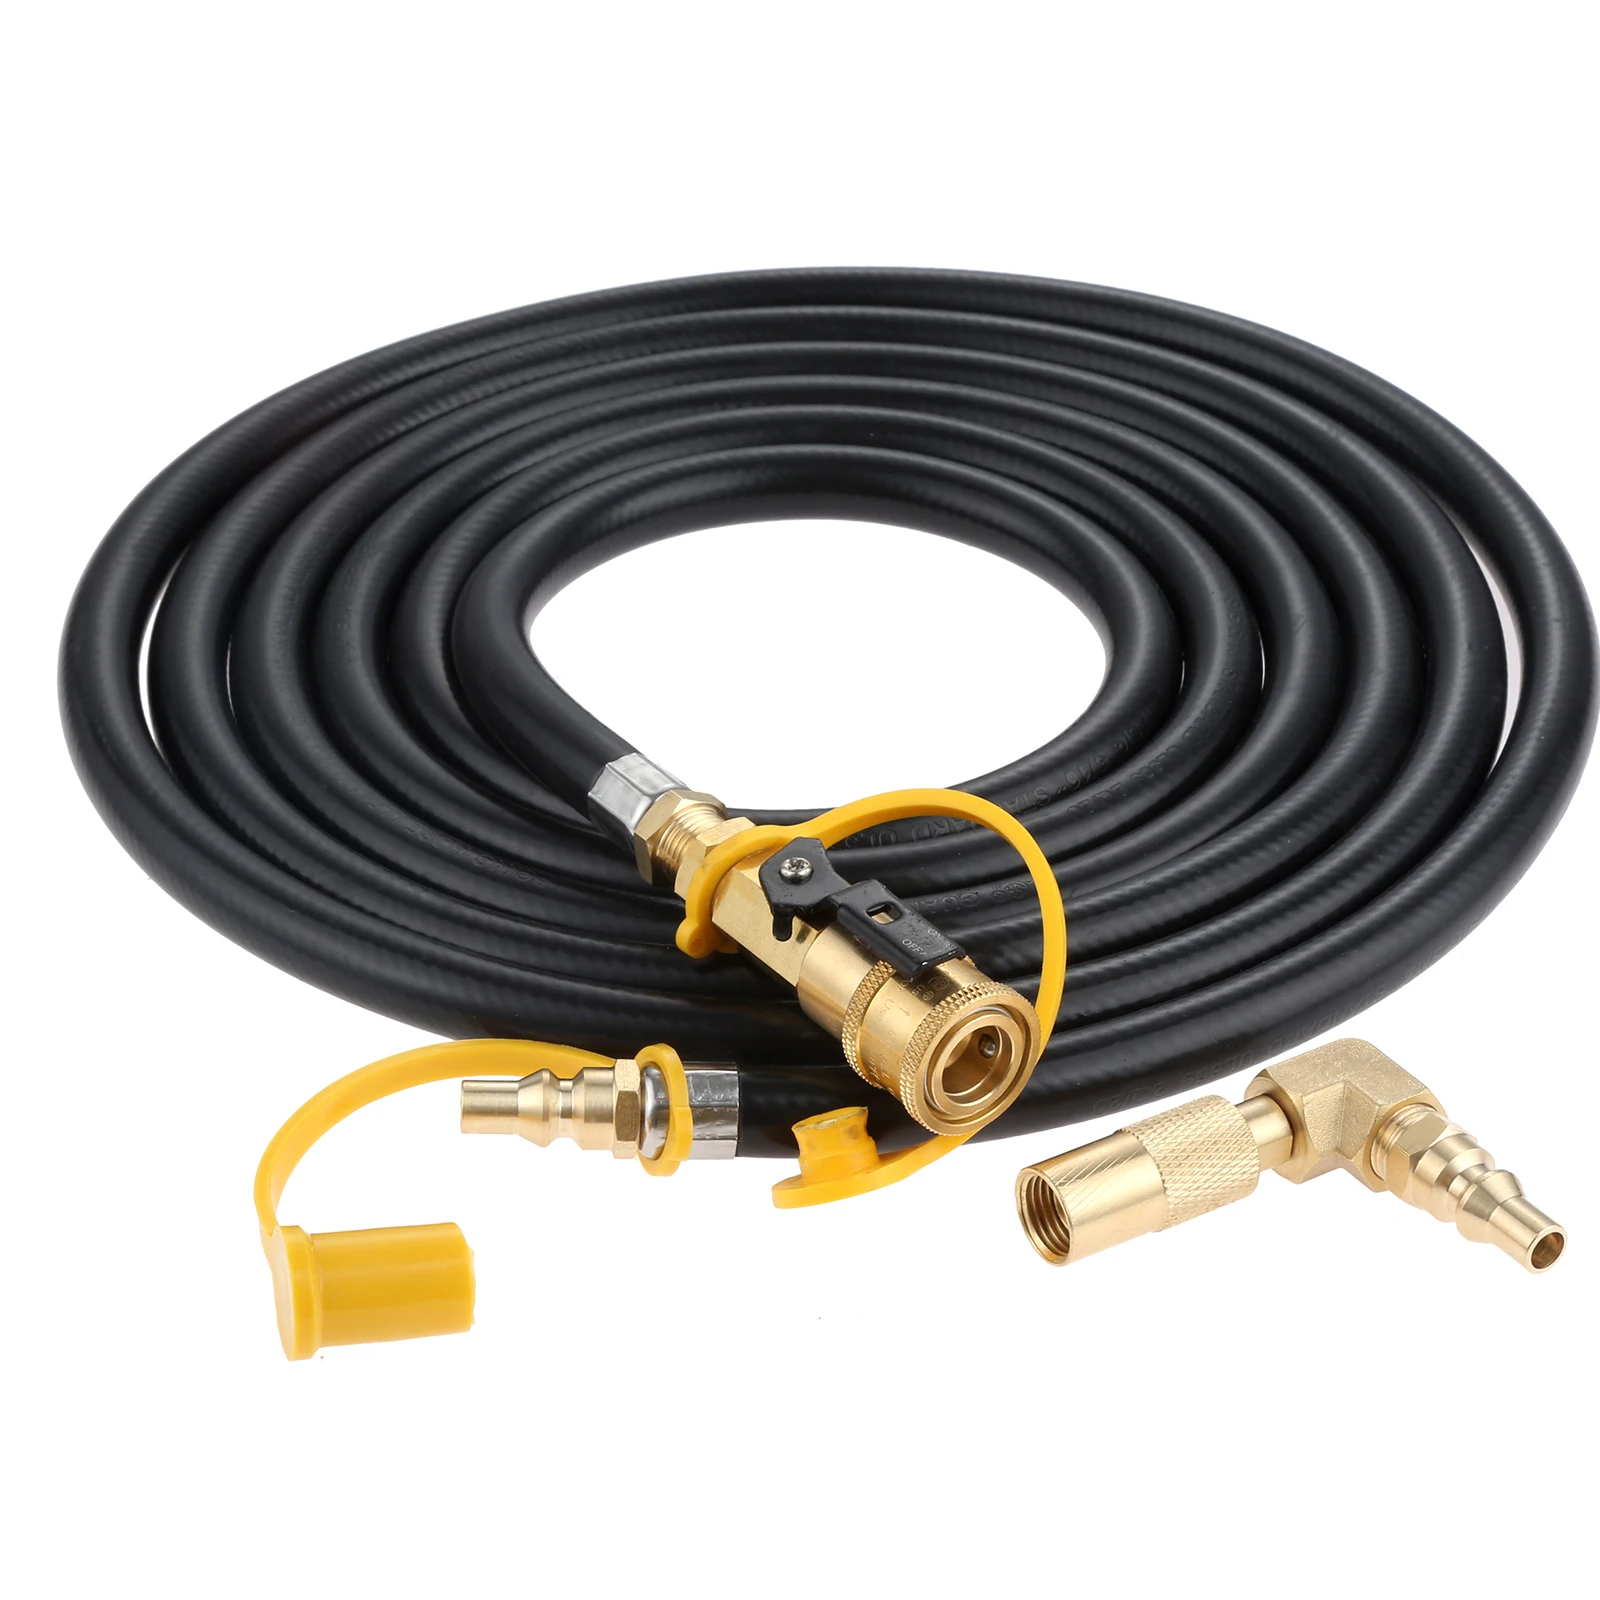 1/4" Quick Disconnect RV Gas Grill BBQ 12 ft 12' Propane Hose with Shutoff 